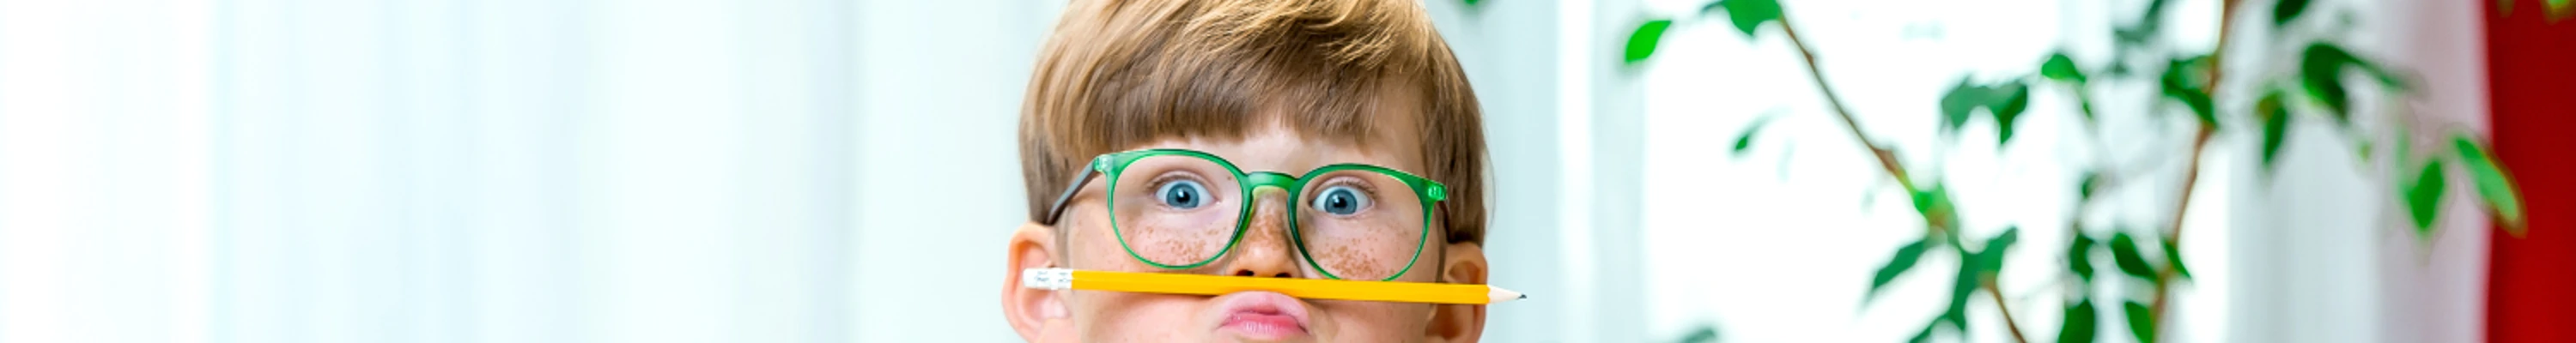 Boy With Pencil And Glasses Banner